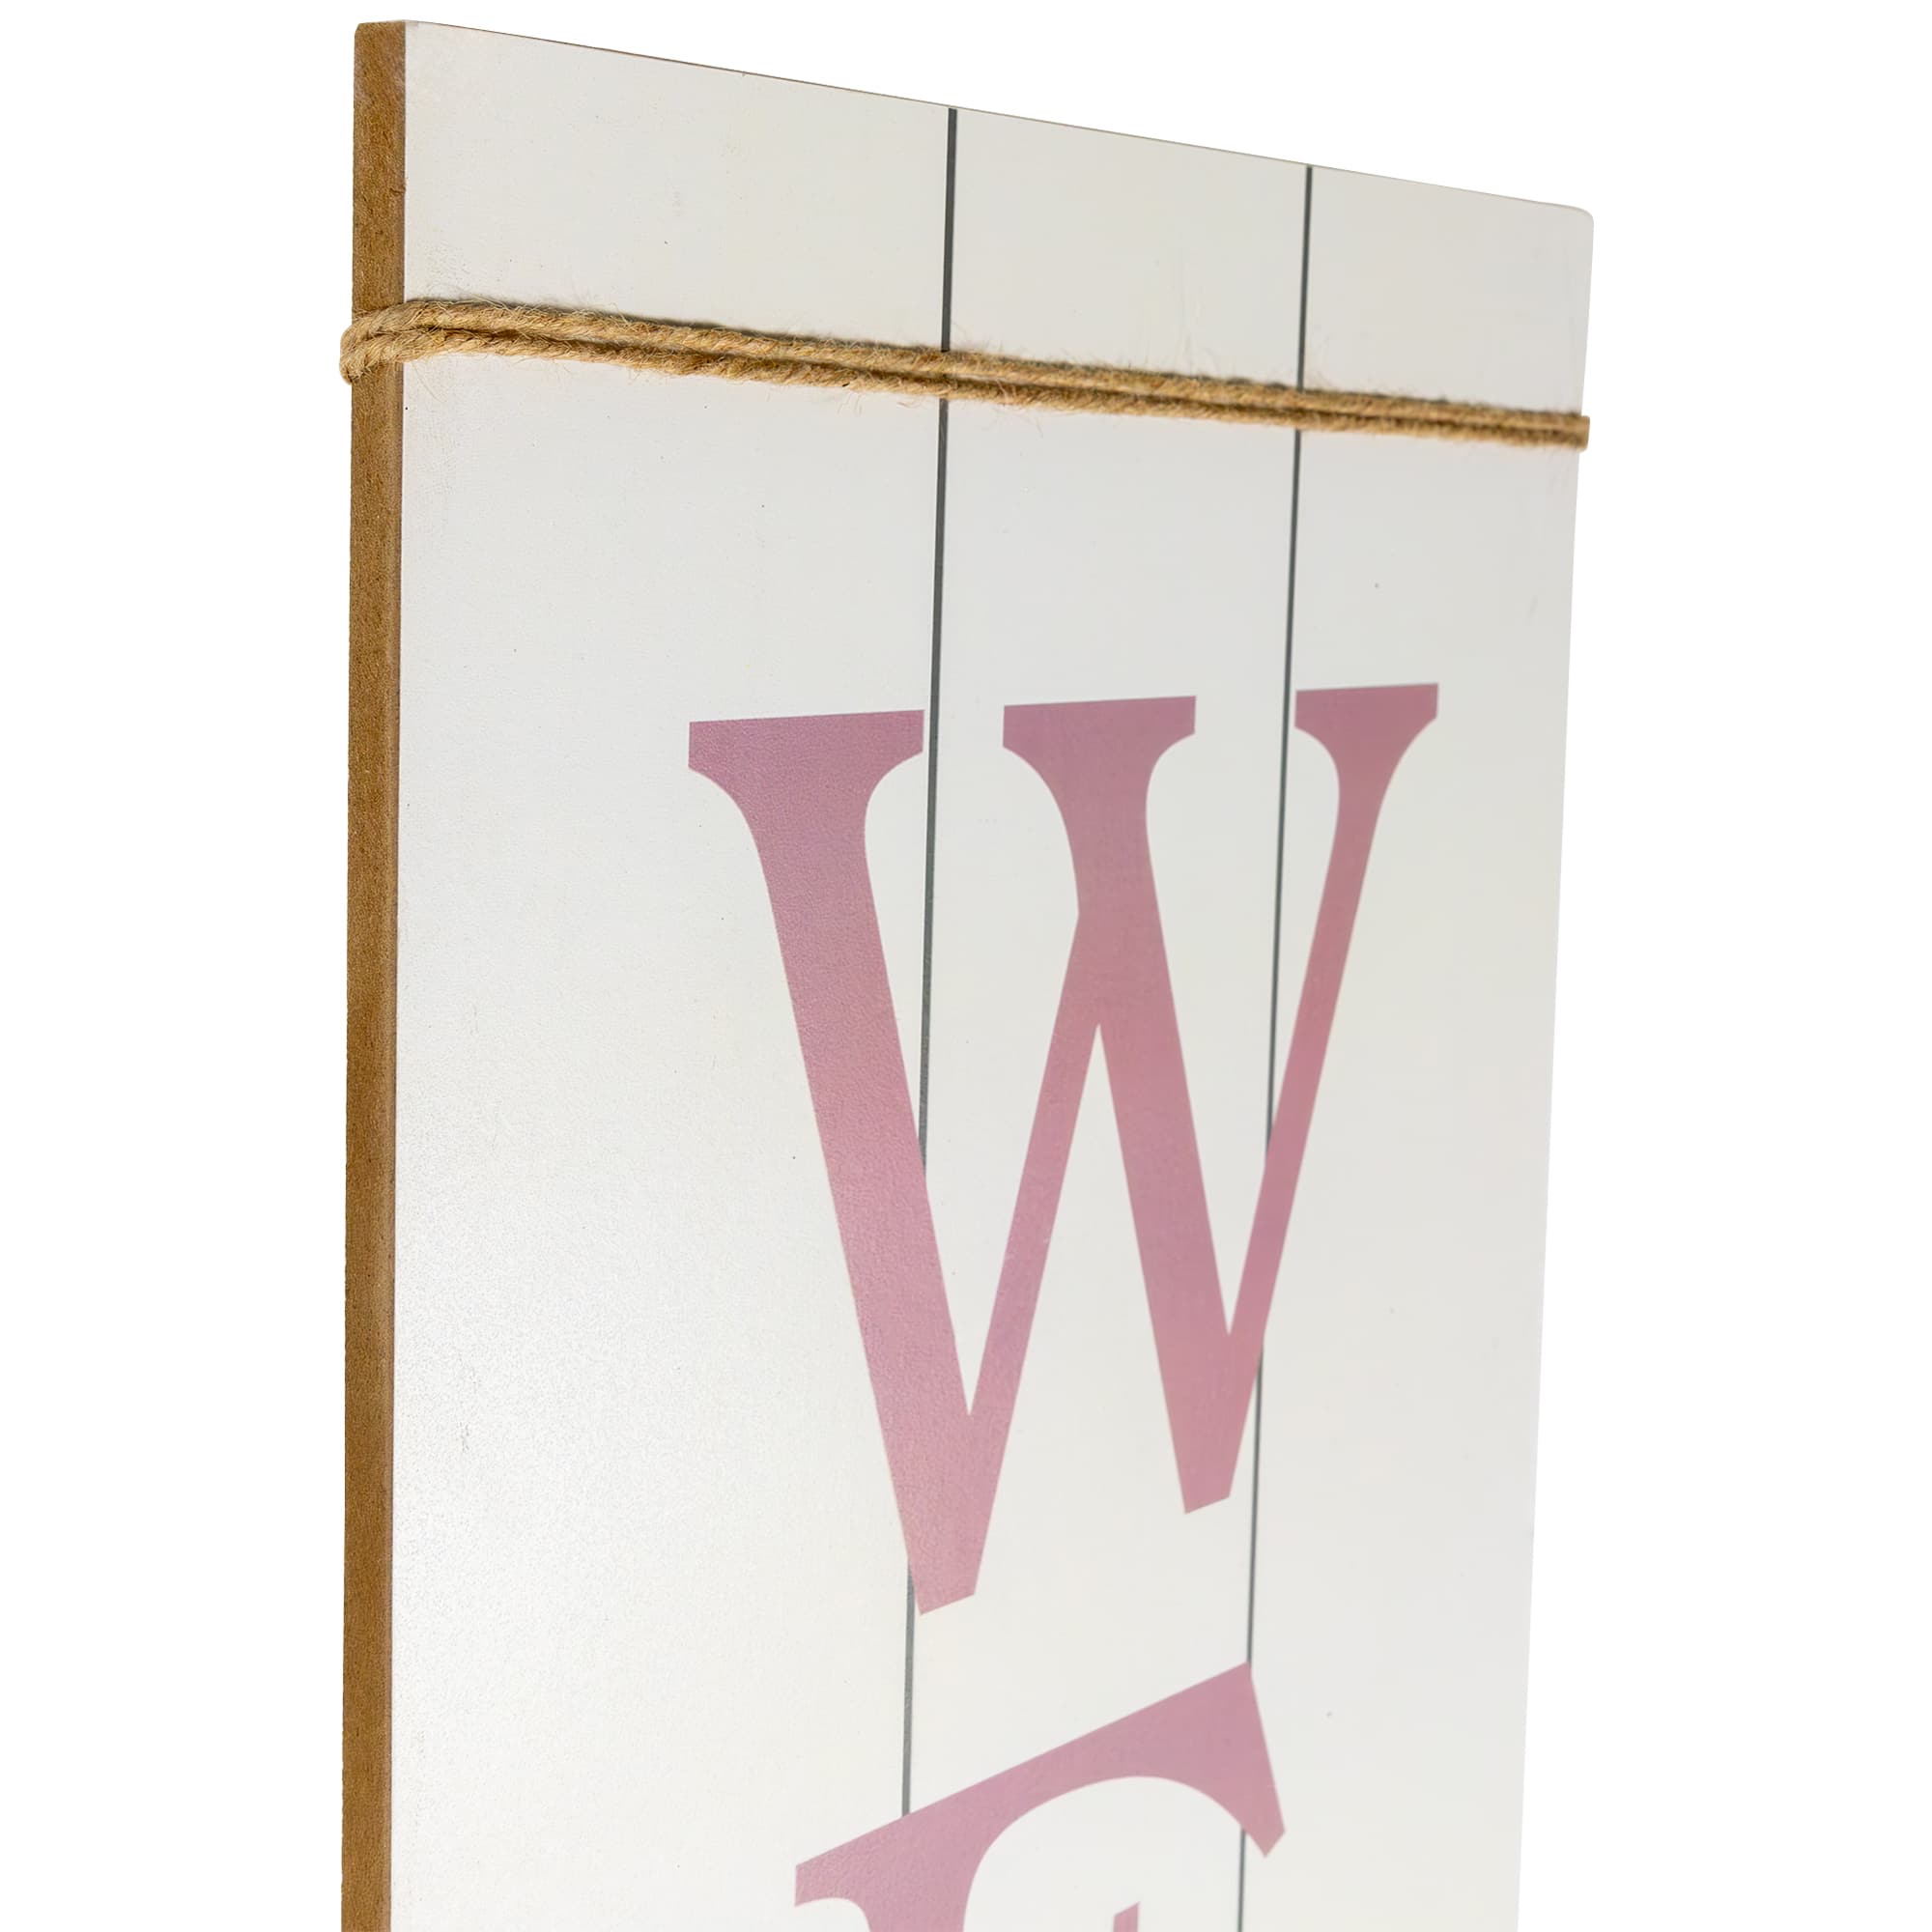 4ft. Floral Welcome Wooden Spring Wall Sign